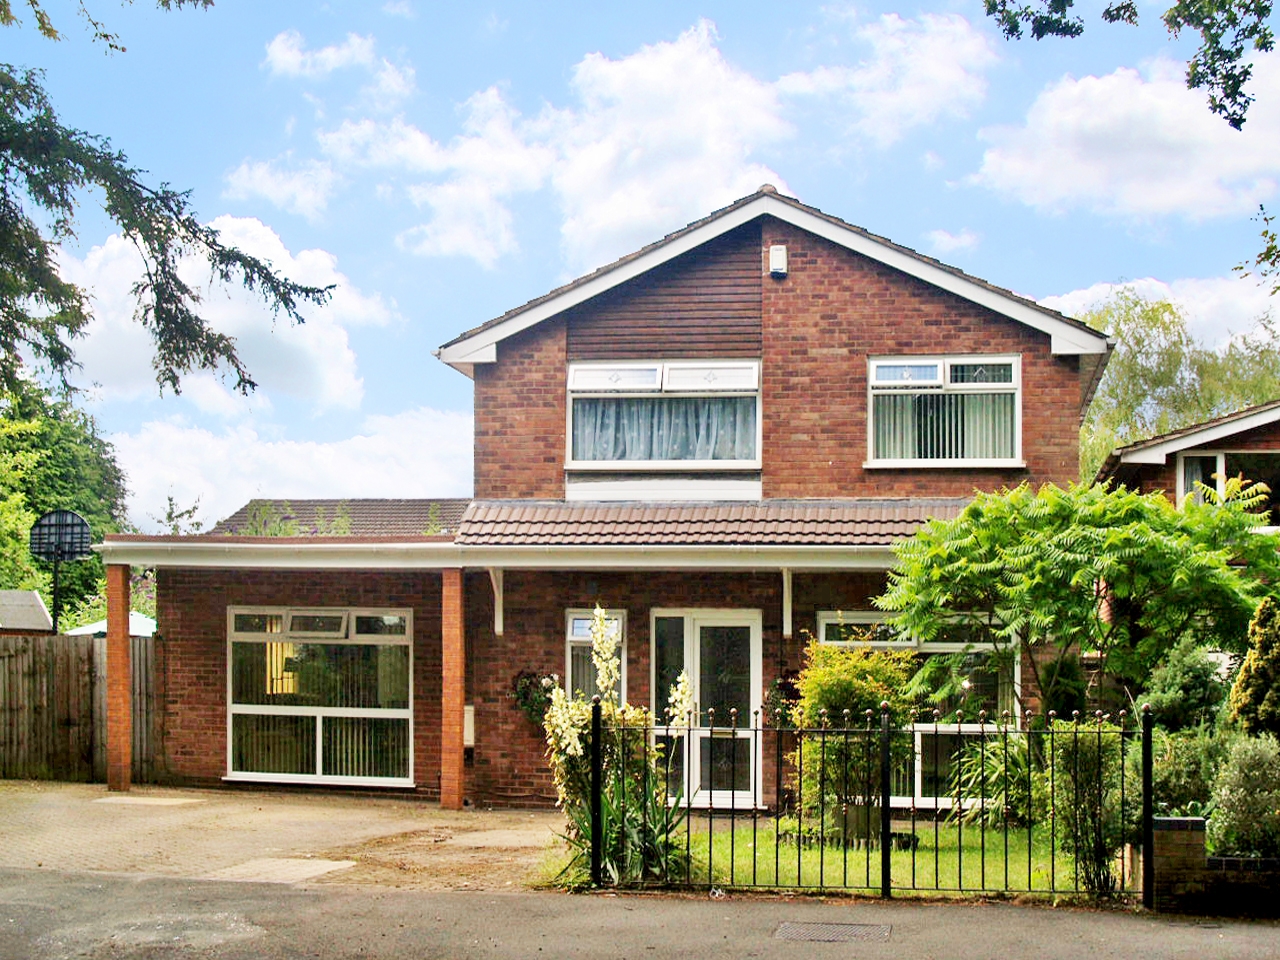 4 bedroom detached house SSTC in Solihull - Main Image.